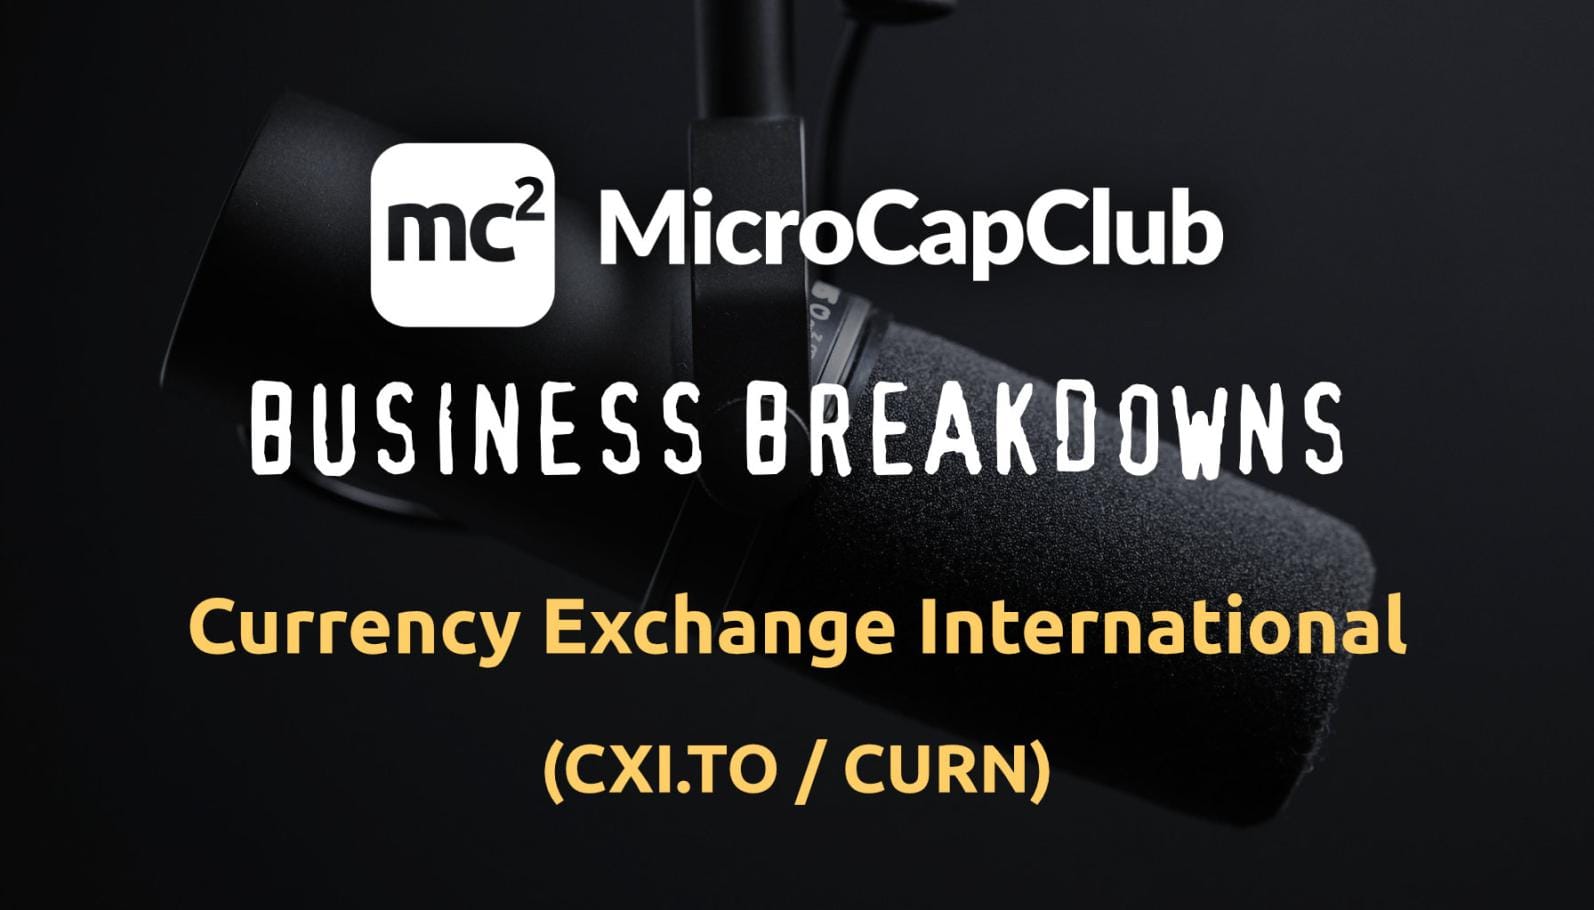 Currency Exchange International (CXI.TO / CURN)